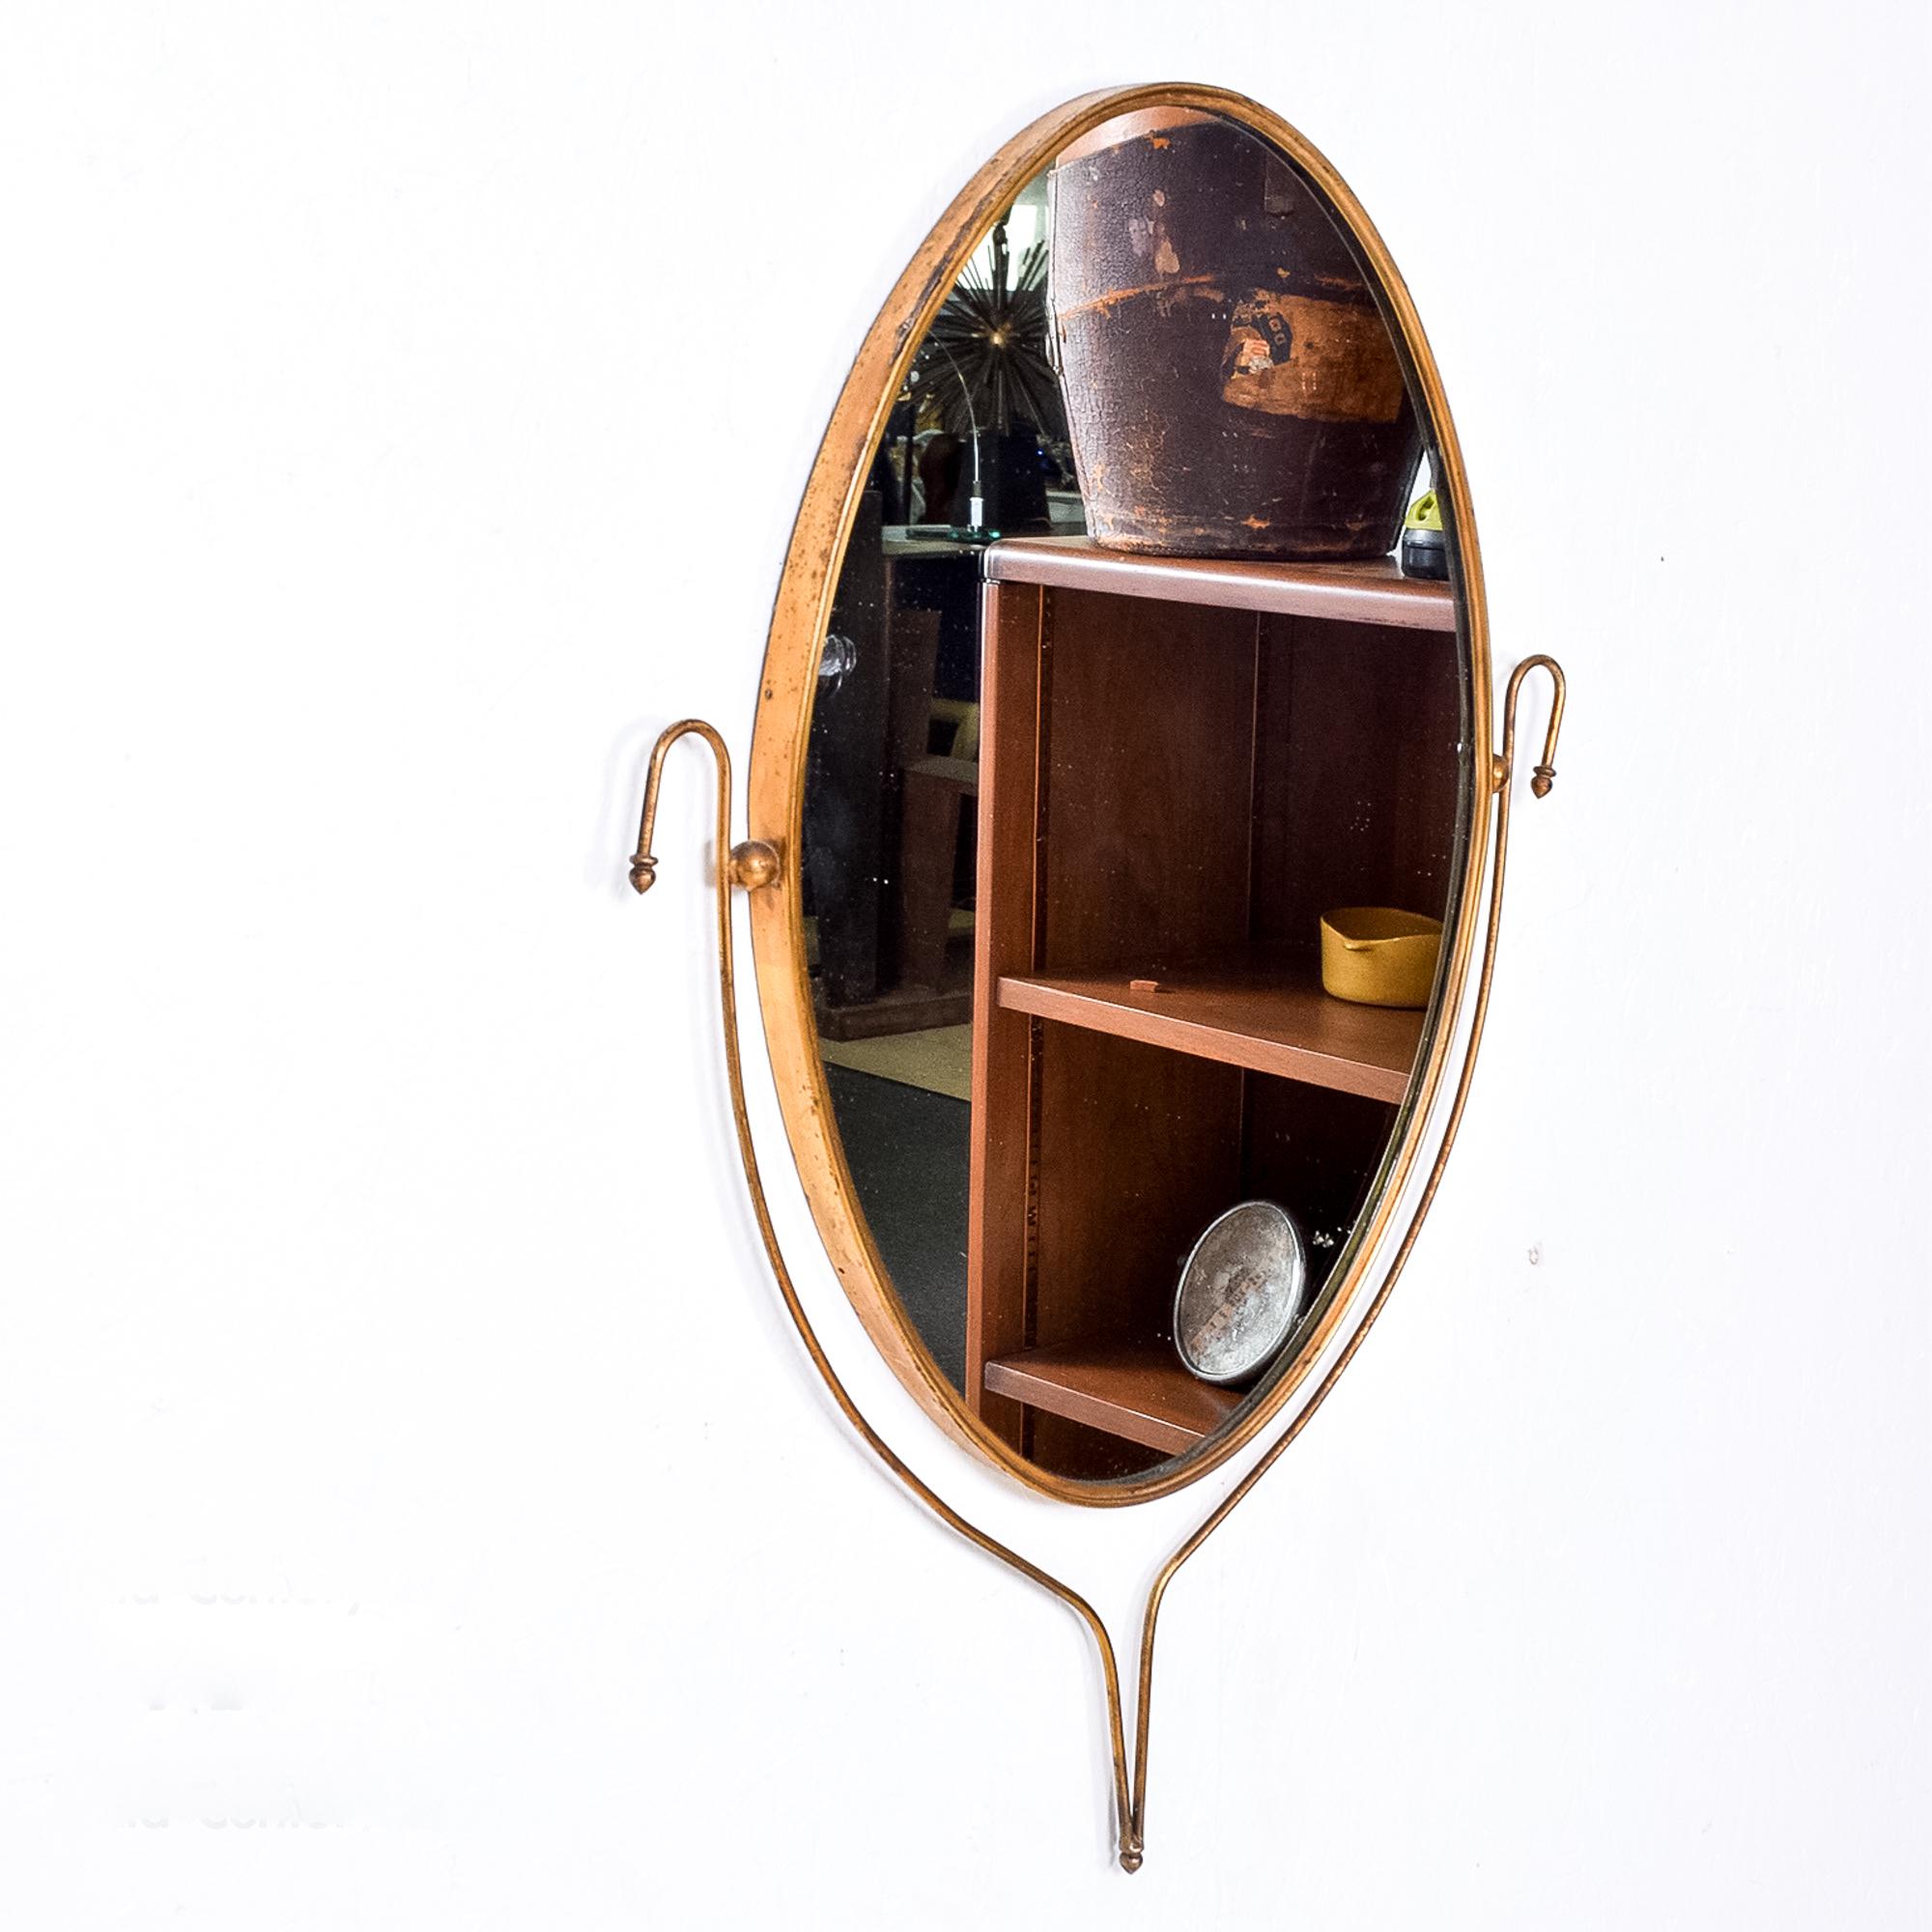 Italian Regency vintage sculptural wall mirror in an oval shape elegant simple style of Gio Ponti (Designer) and Fontana Arte (Manufacturer) piece is Unmarked. Italy, circa 1950s.
It includes a new glass mirror. Brass frame retains original vintage